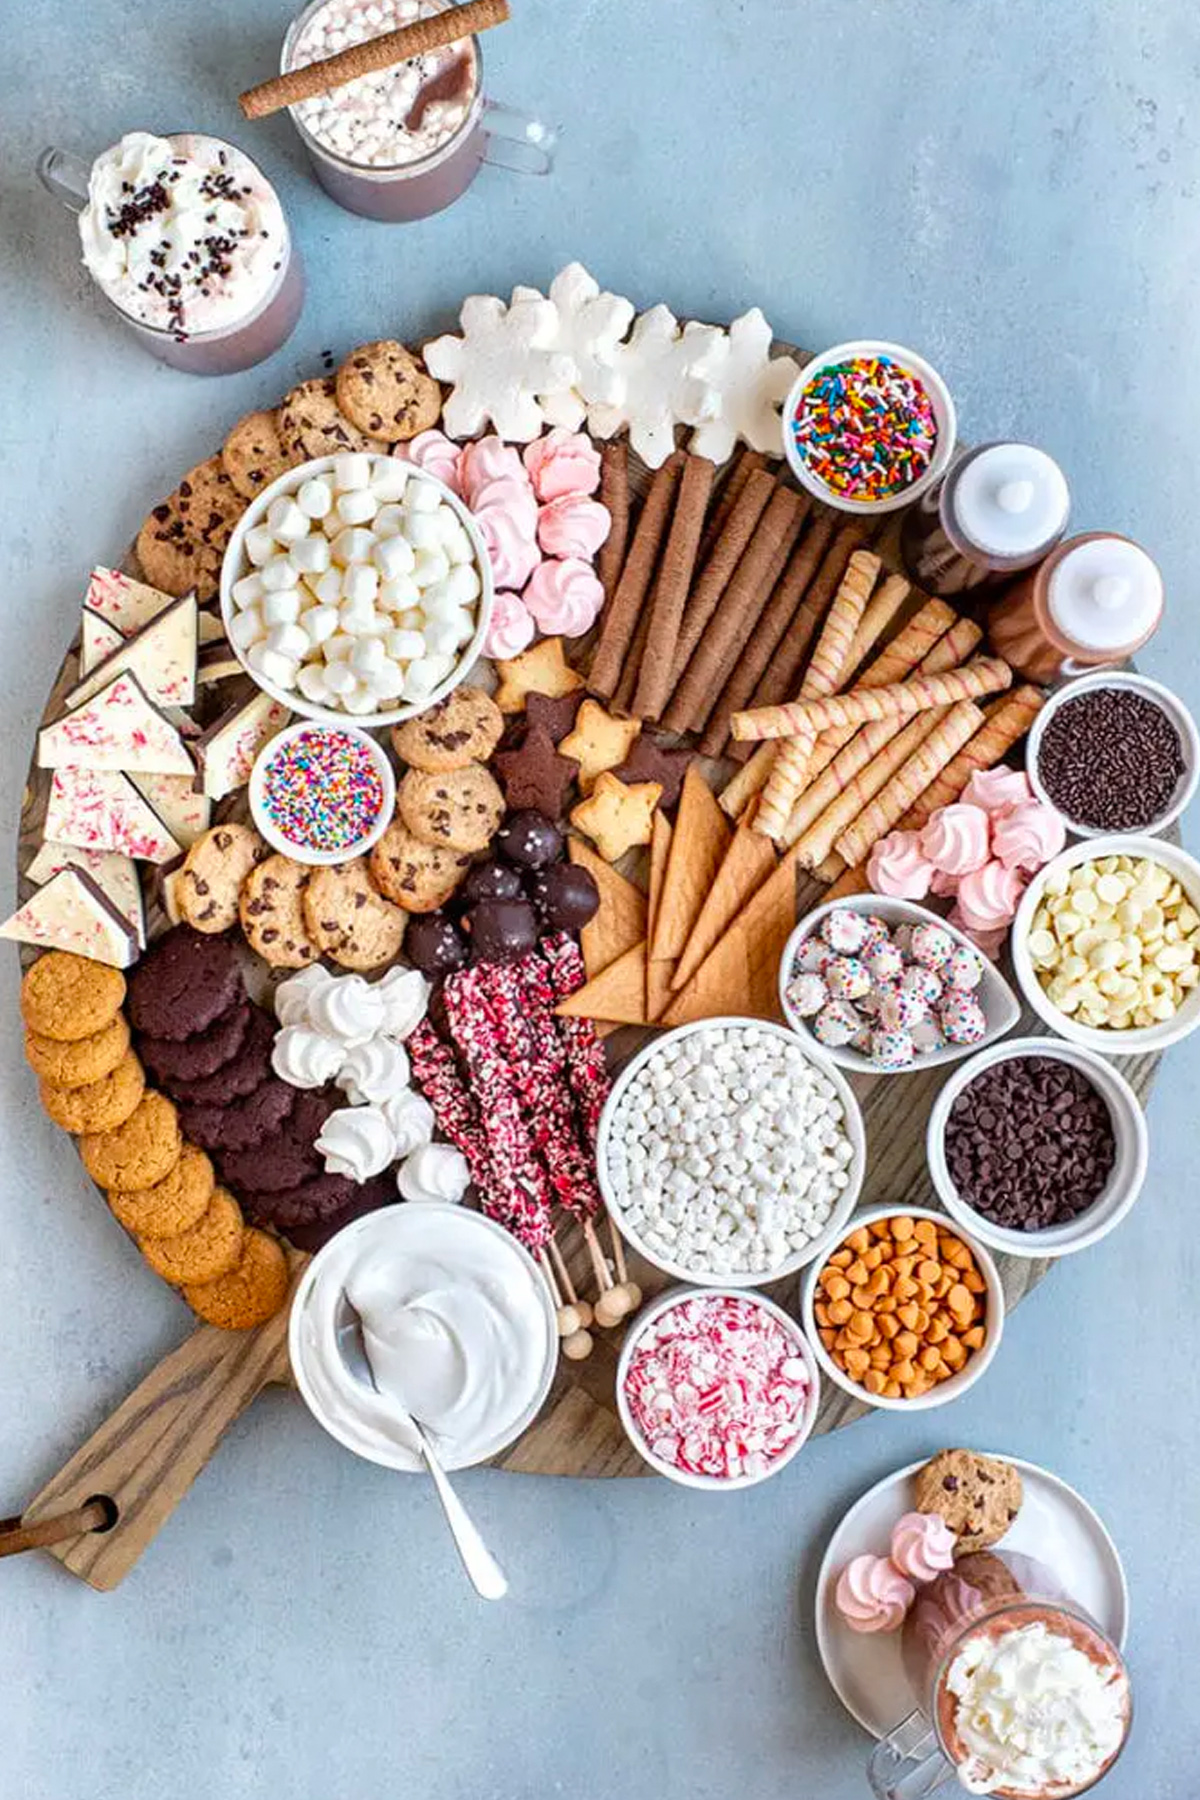 Marshmallows, cookies, chocolate, and sprinkles are included on Ain't Too Proud to Meg's Hot Chocolate Bar board.